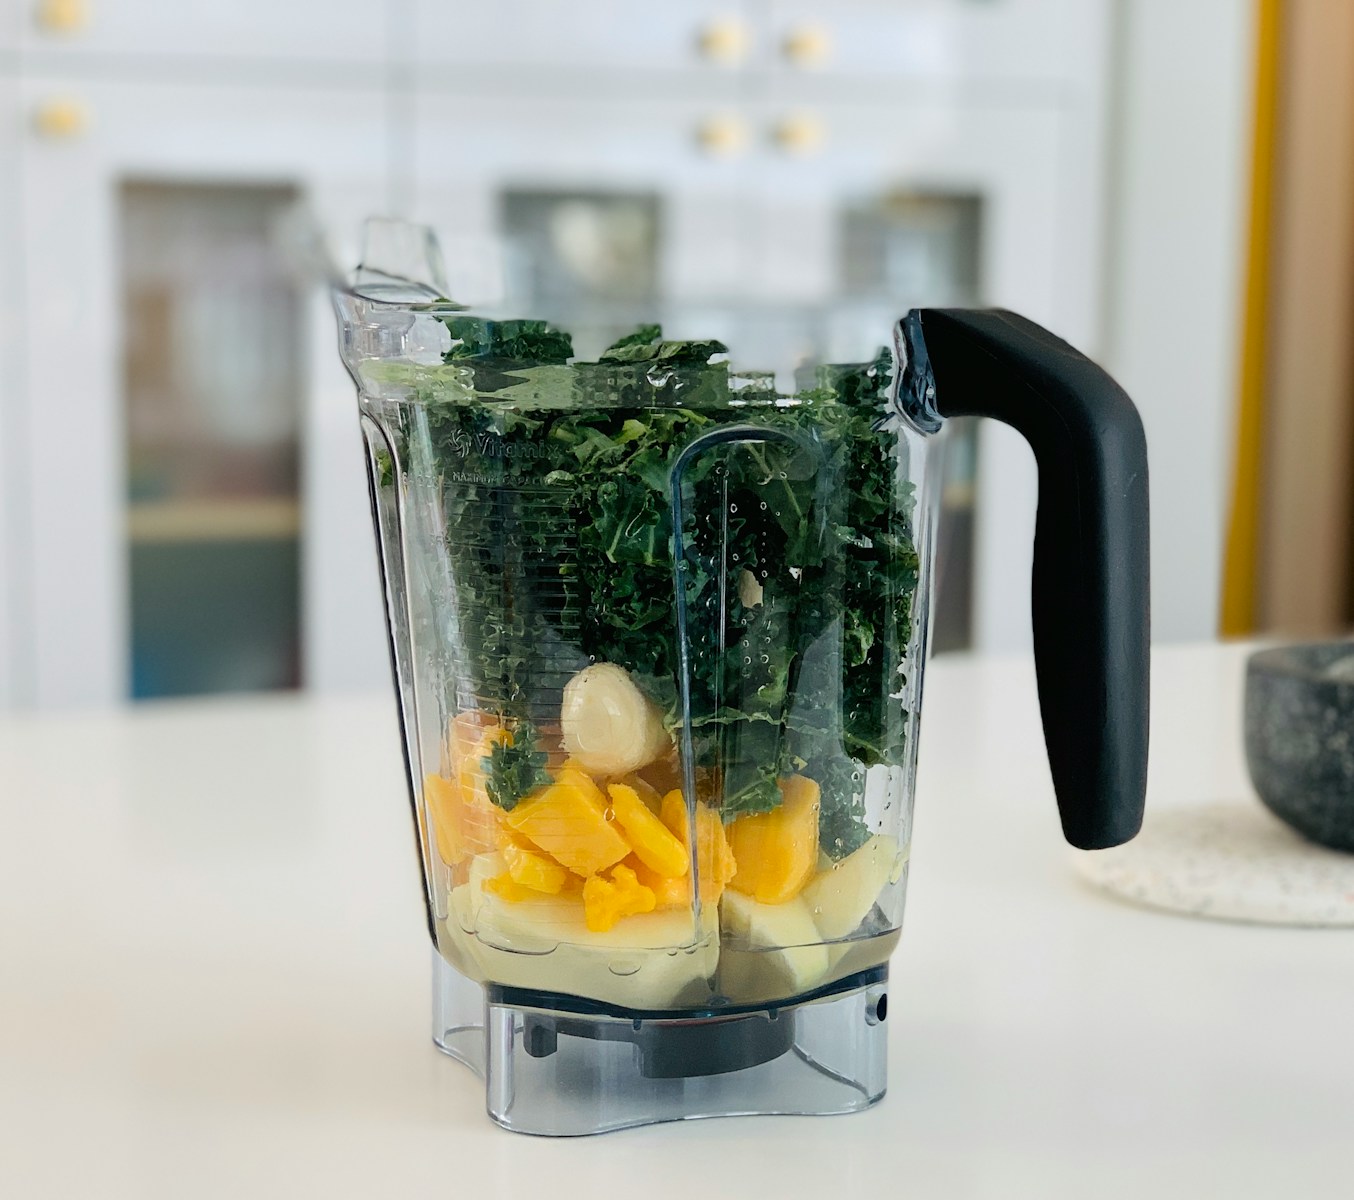 How to clean Ninja blender: maintain your blender to its best ability